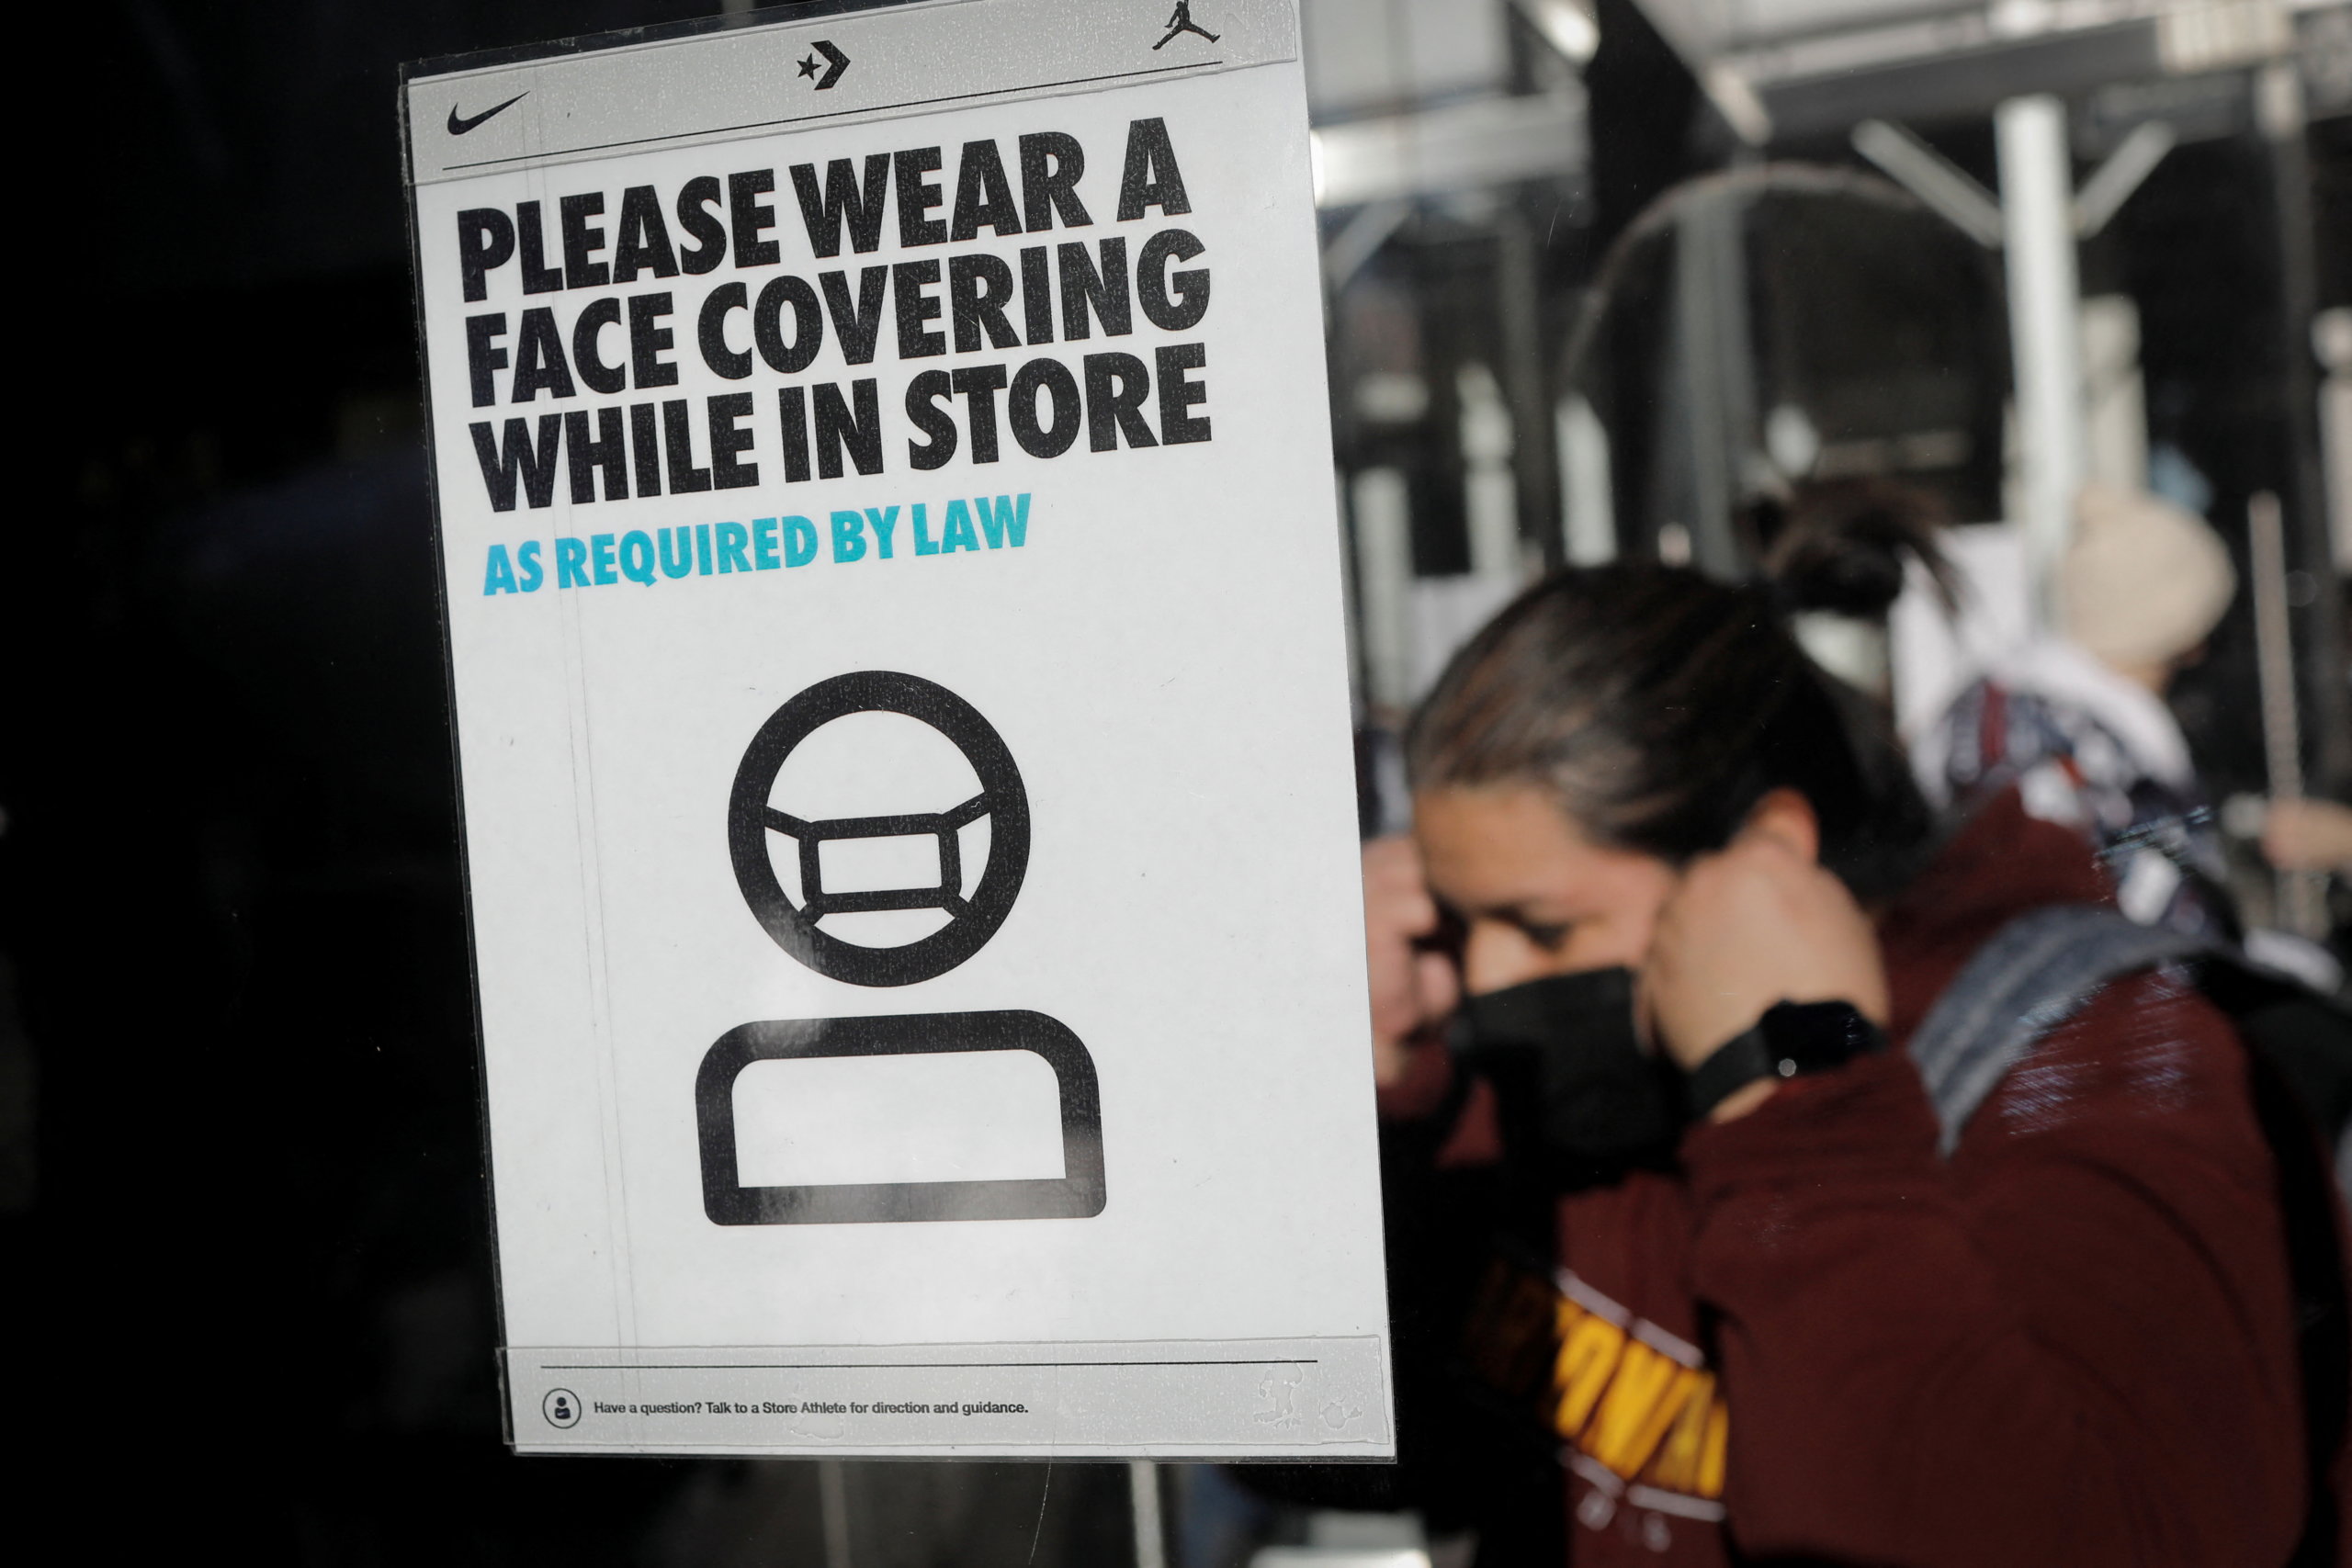 A shopper puts on a protective face mask as she enters a store, in accordance with the New York State indoor masking mandates that went into effect amid the spread of COVID-19